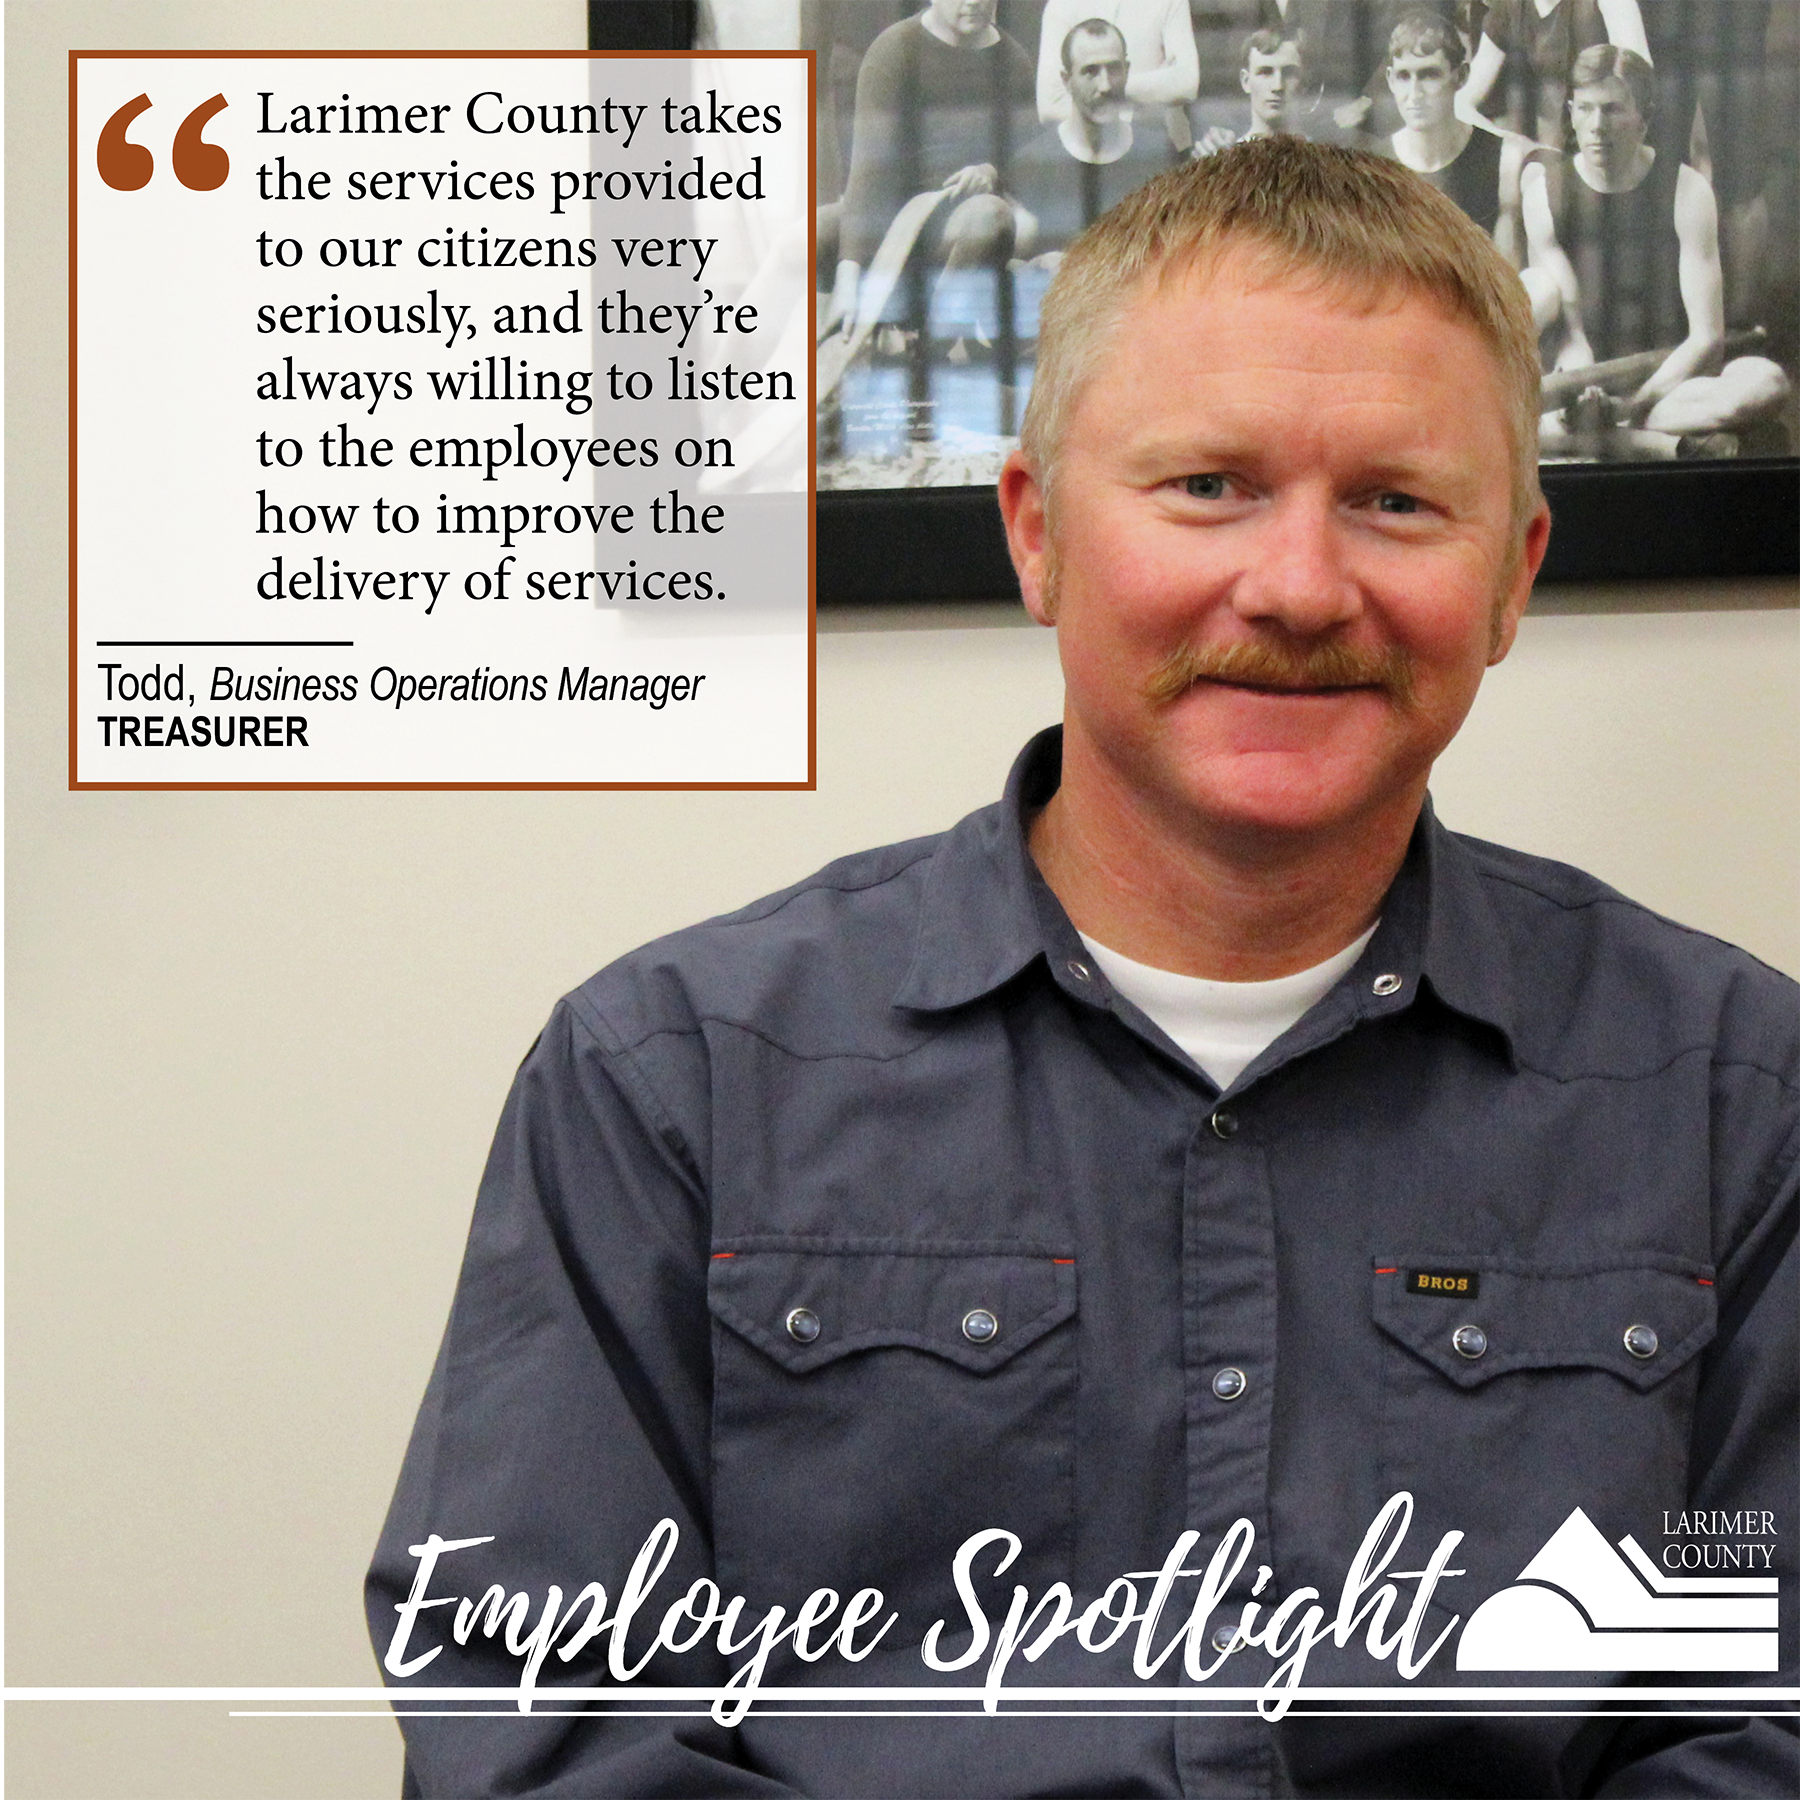 Image 11: "Larimer County takes the services provided to our citizens very seriously, and they're always willing to listen to the employees on how to improve the delivery of services."